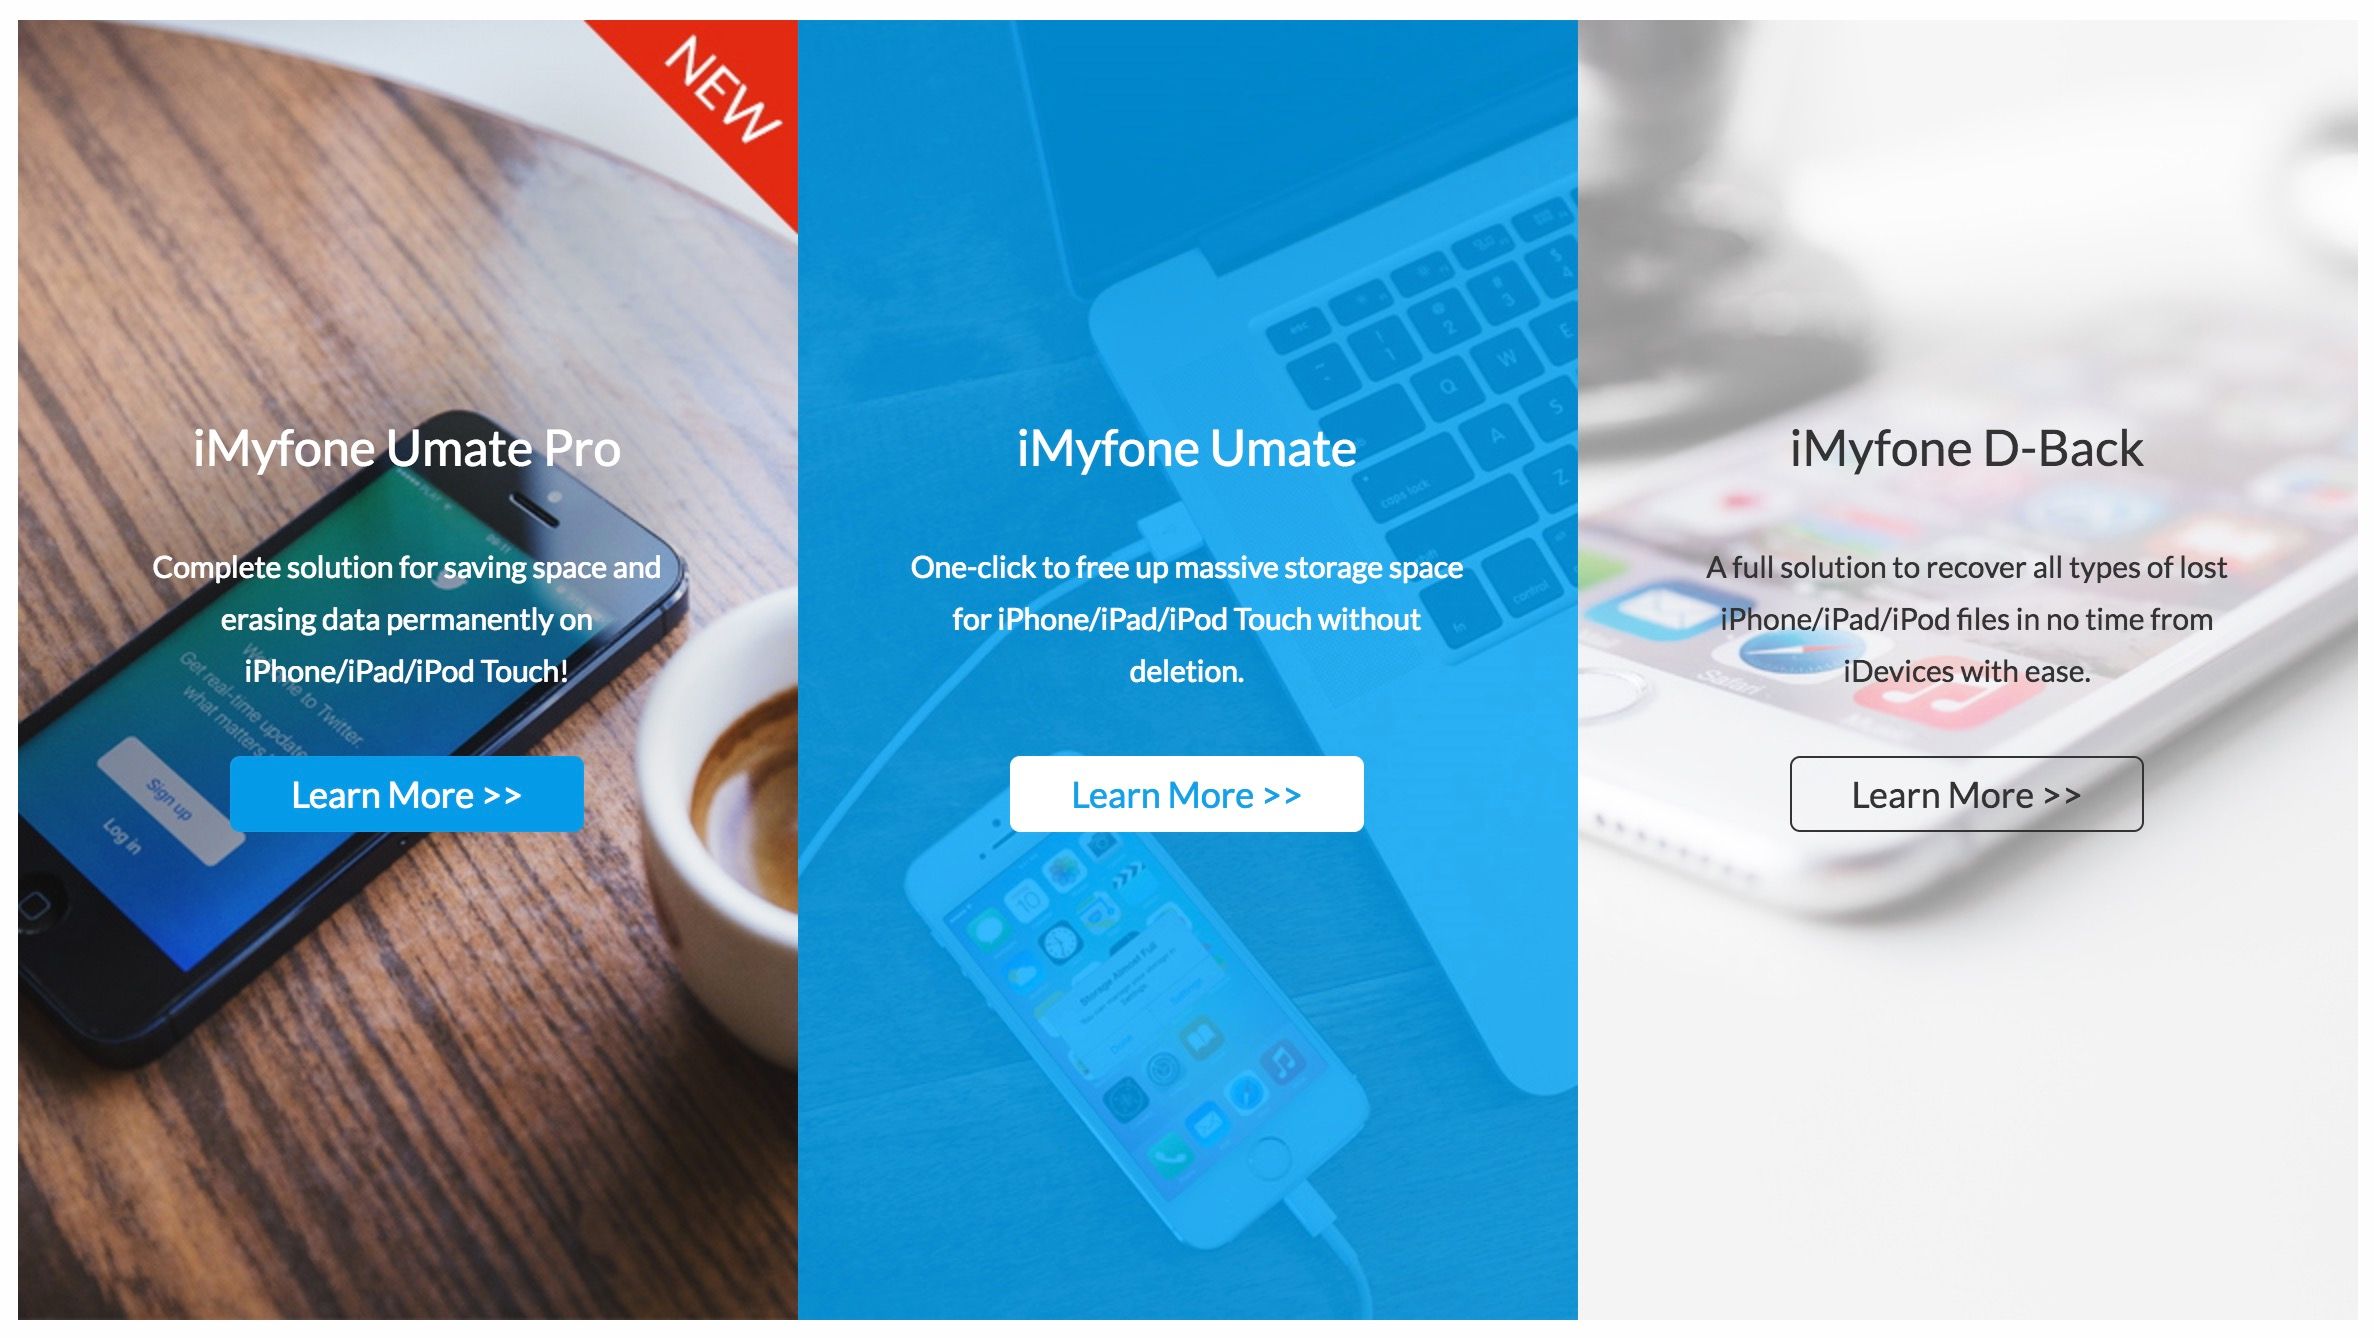 imyfone umate pro the secure way to erase phone data and free up space image 7